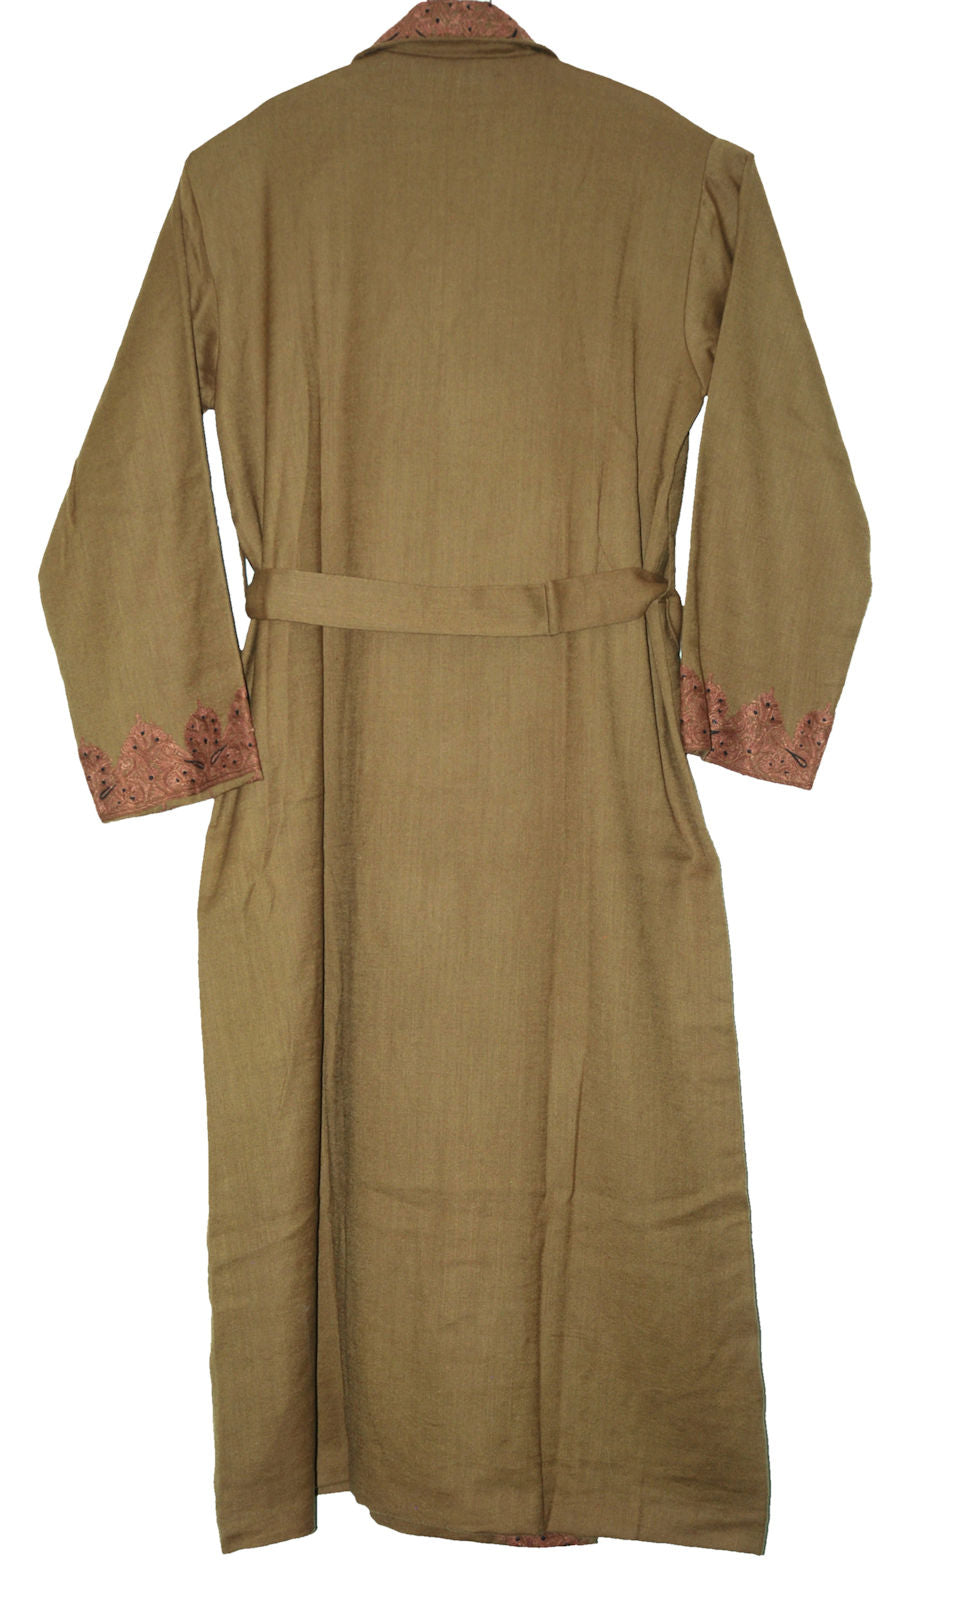 Woolen Gents Dressing Gown Brown, Multicolor Embroidery #WG-102